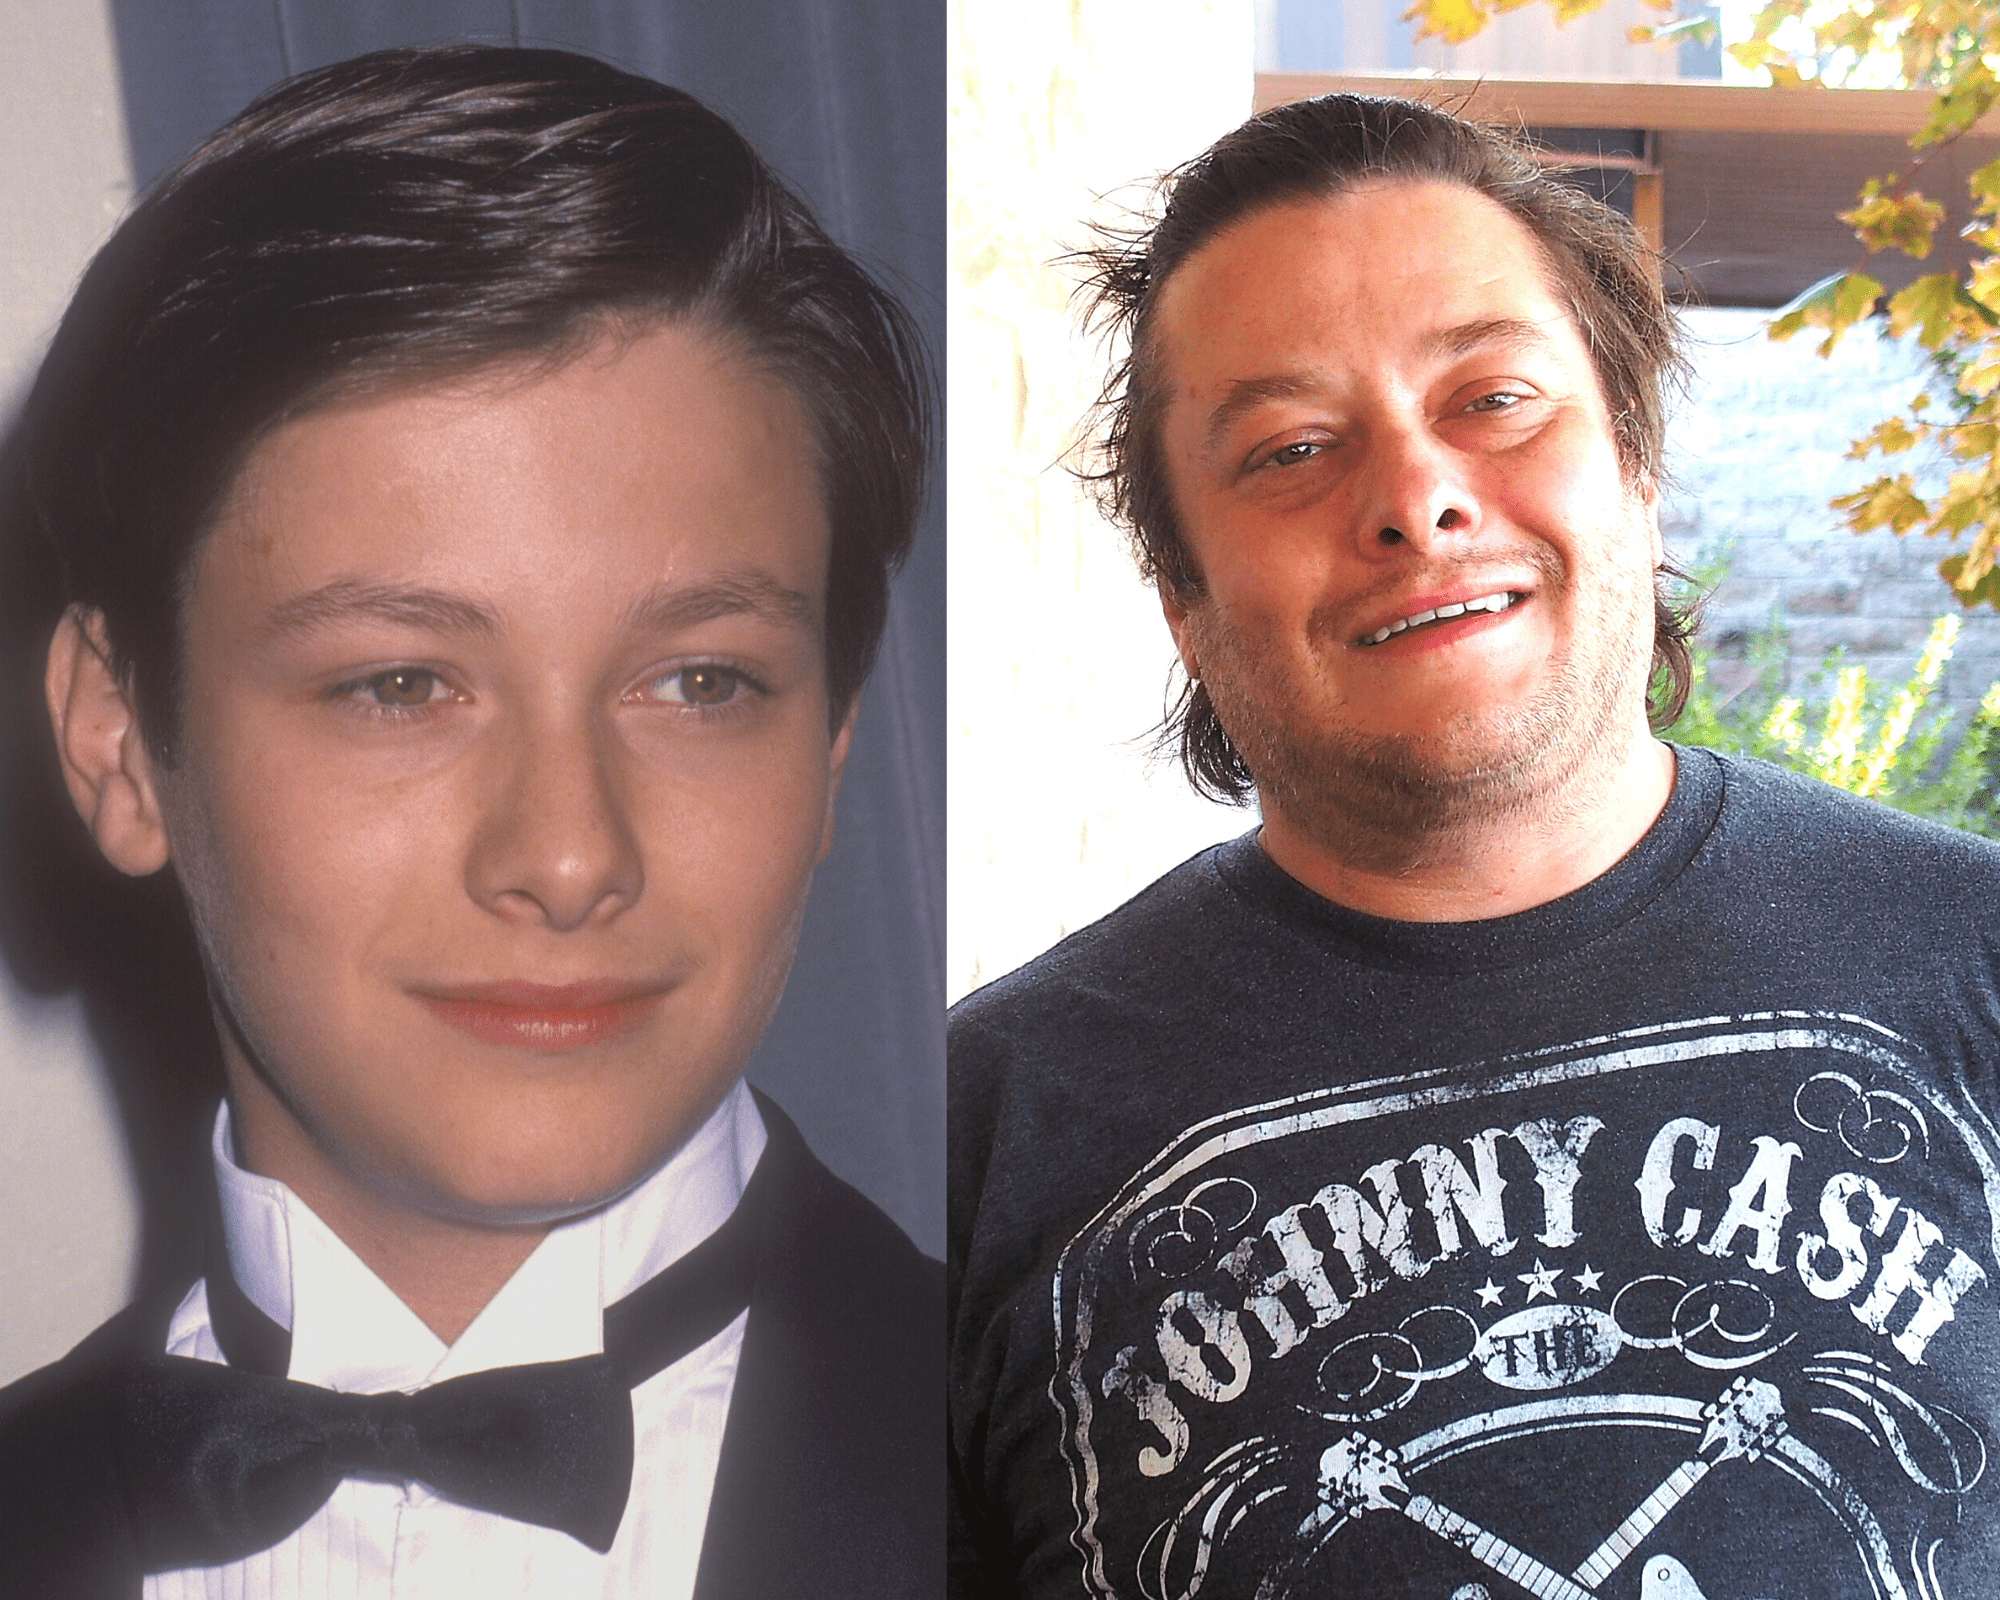 Actor Edward Furlong on June 5, 1992 at Beverly Hilton Hotel in Beverly Hills, California | Edward Furlong at Wayne P.A.L. on October 18, 2020 in Wayne, New Jersey | Getty Images 